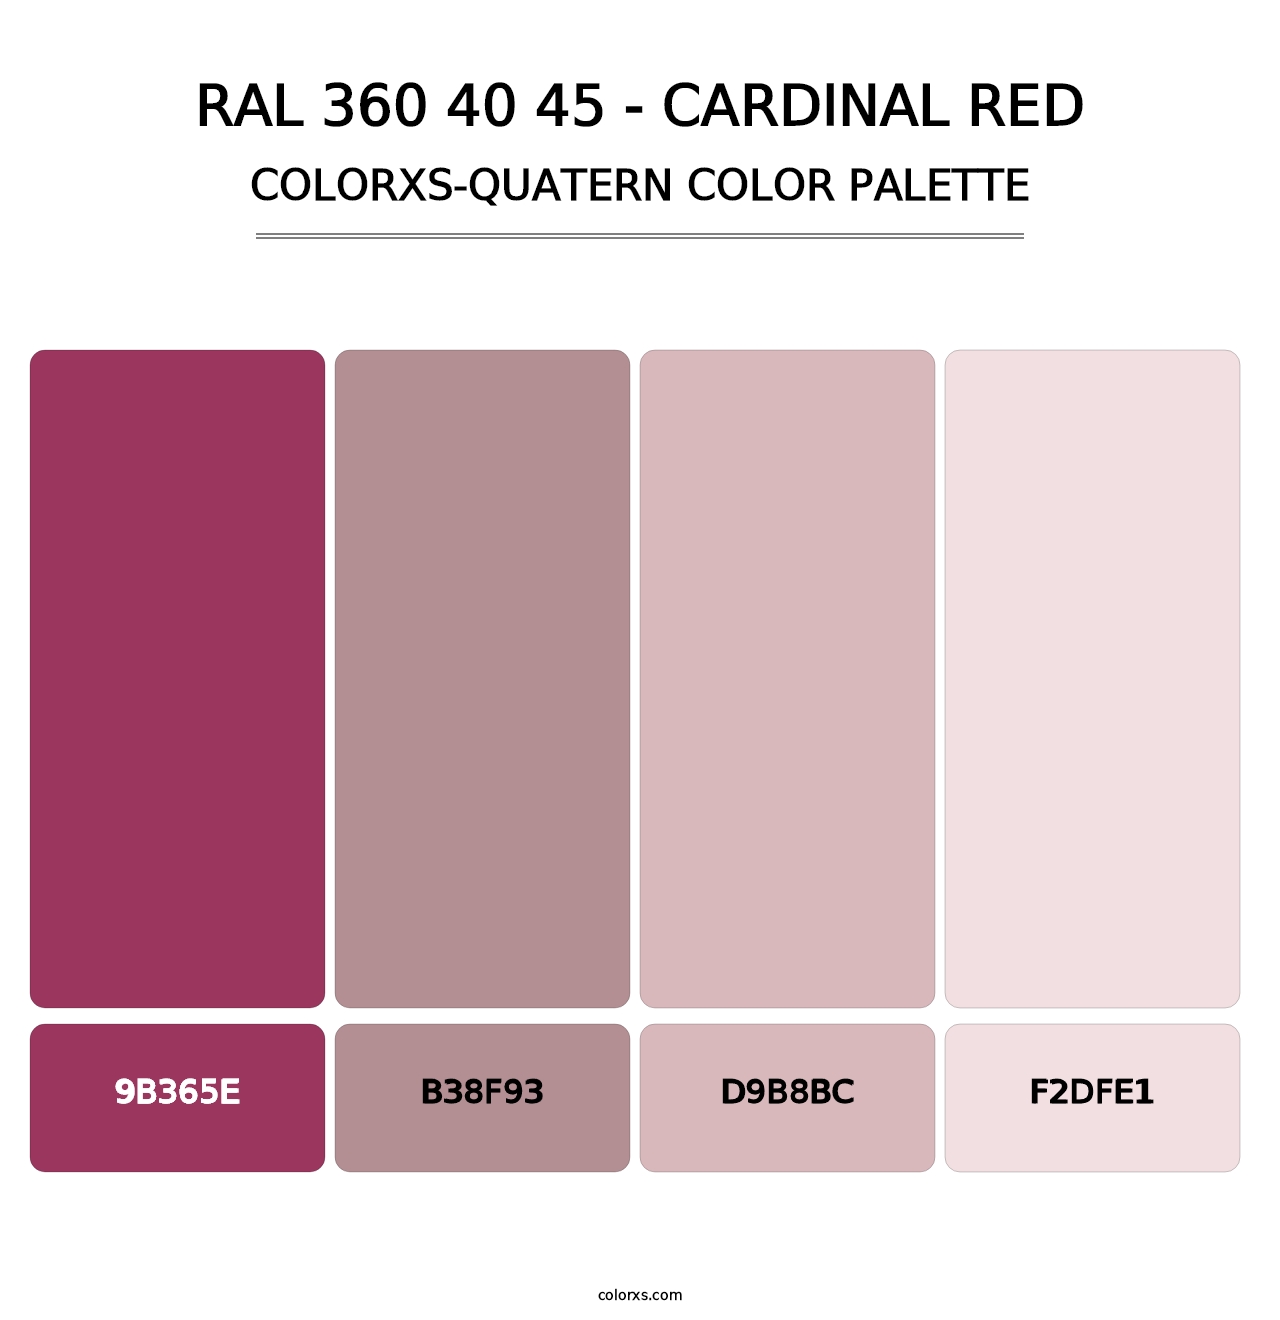 RAL 360 40 45 - Cardinal Red - Colorxs Quatern Palette